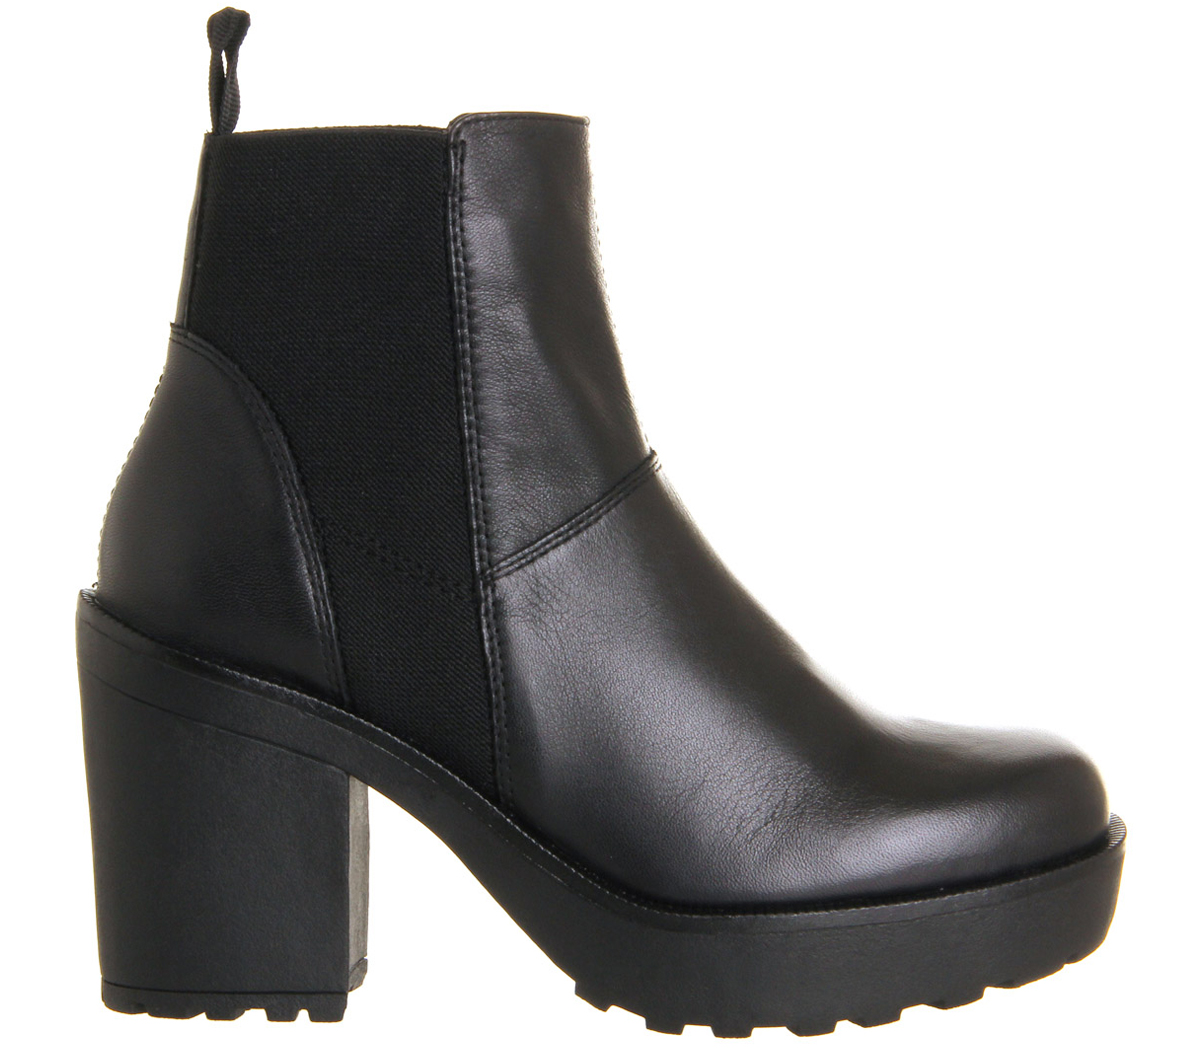 Vagabond Shoemakers Libby Chelsea boots Black Leather - Women's Ankle Boots